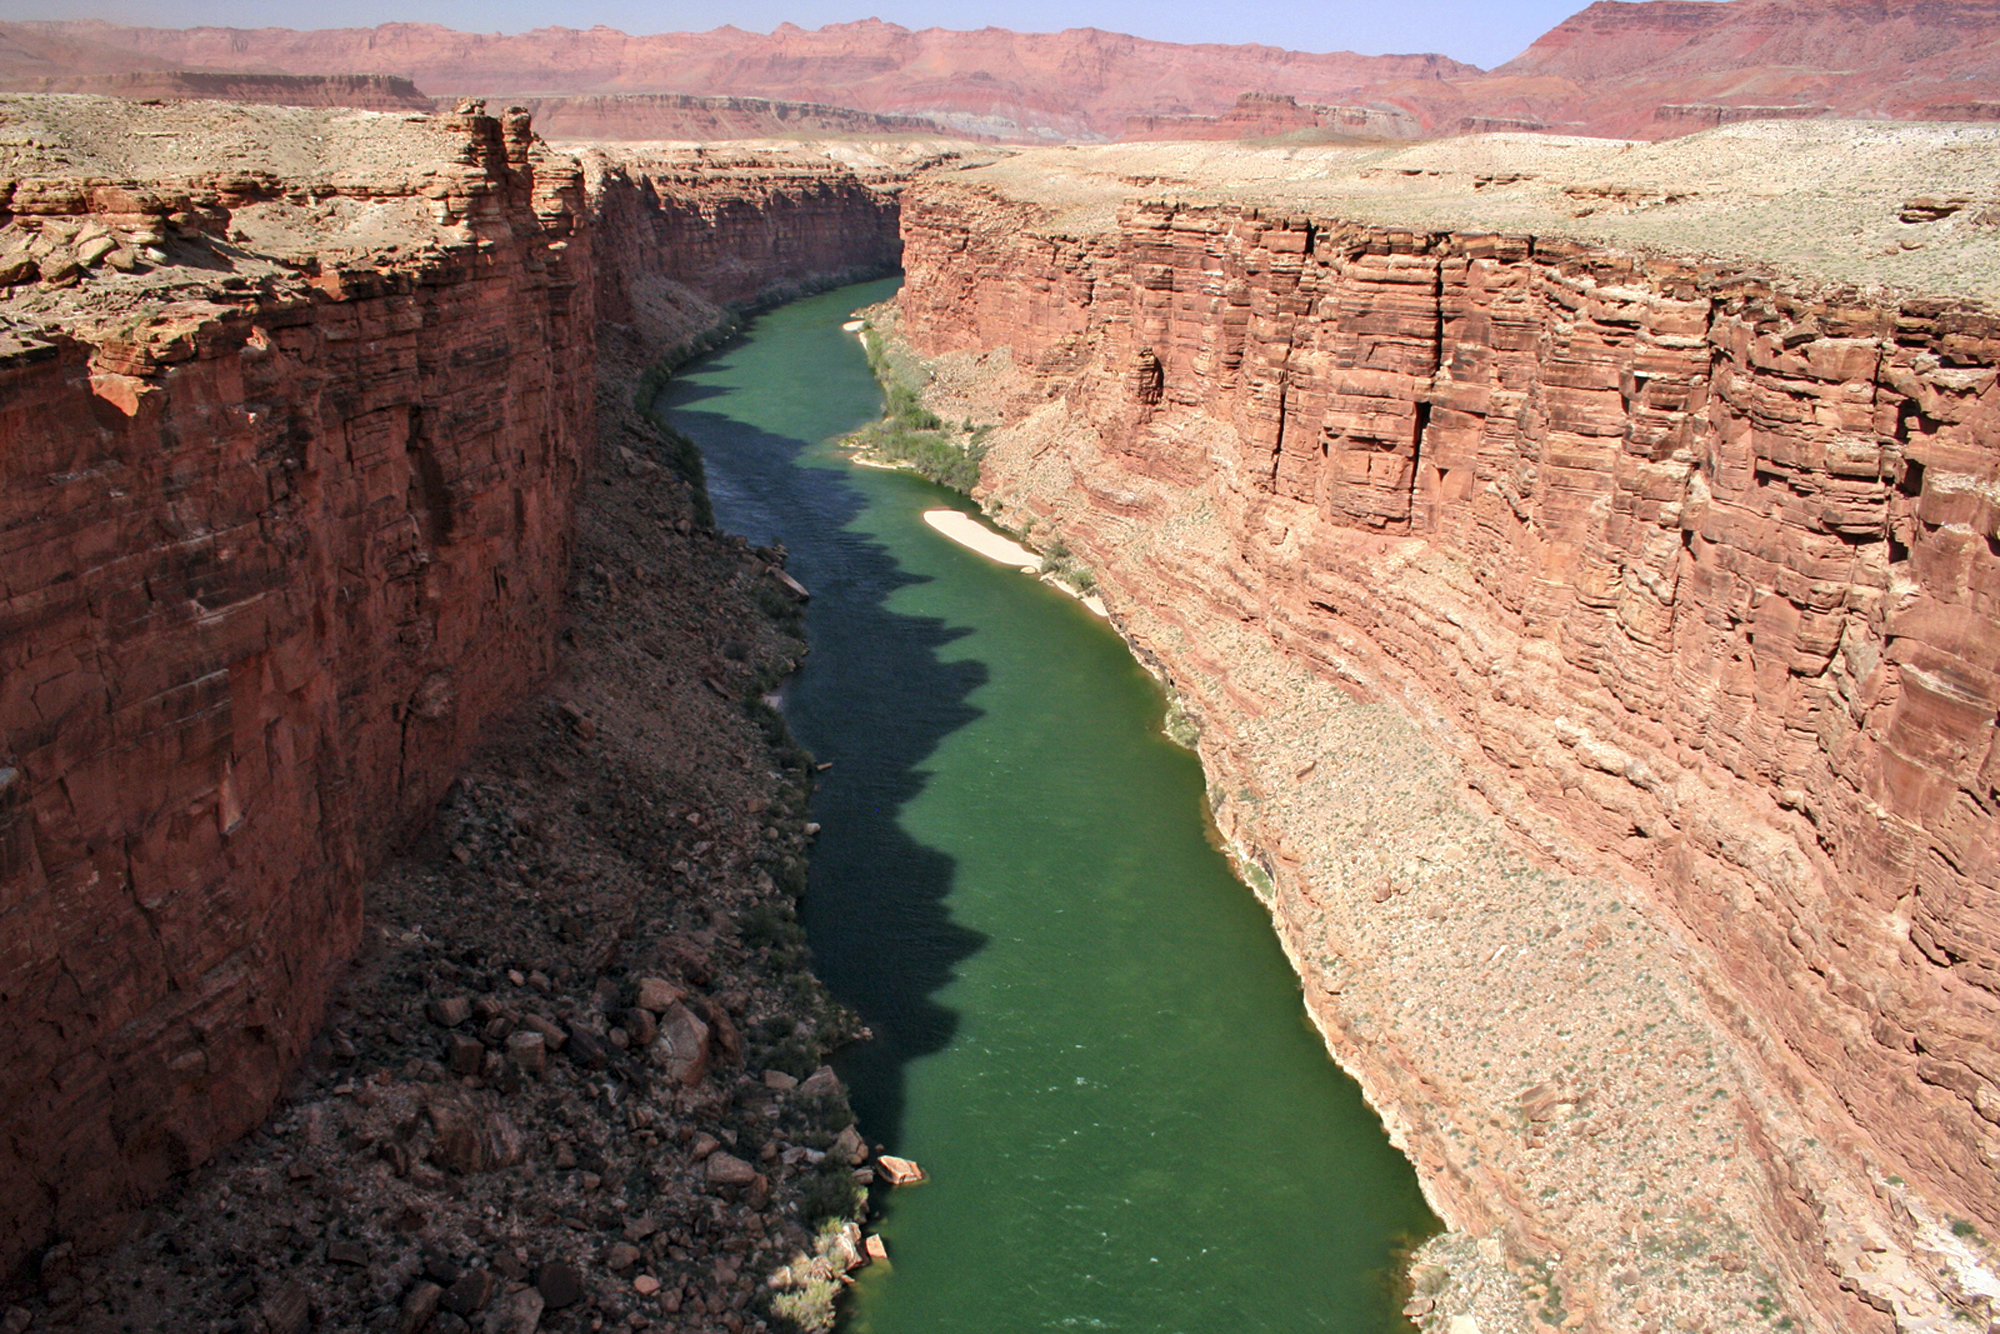 Say NO to uranium mining in the Grand Canyon